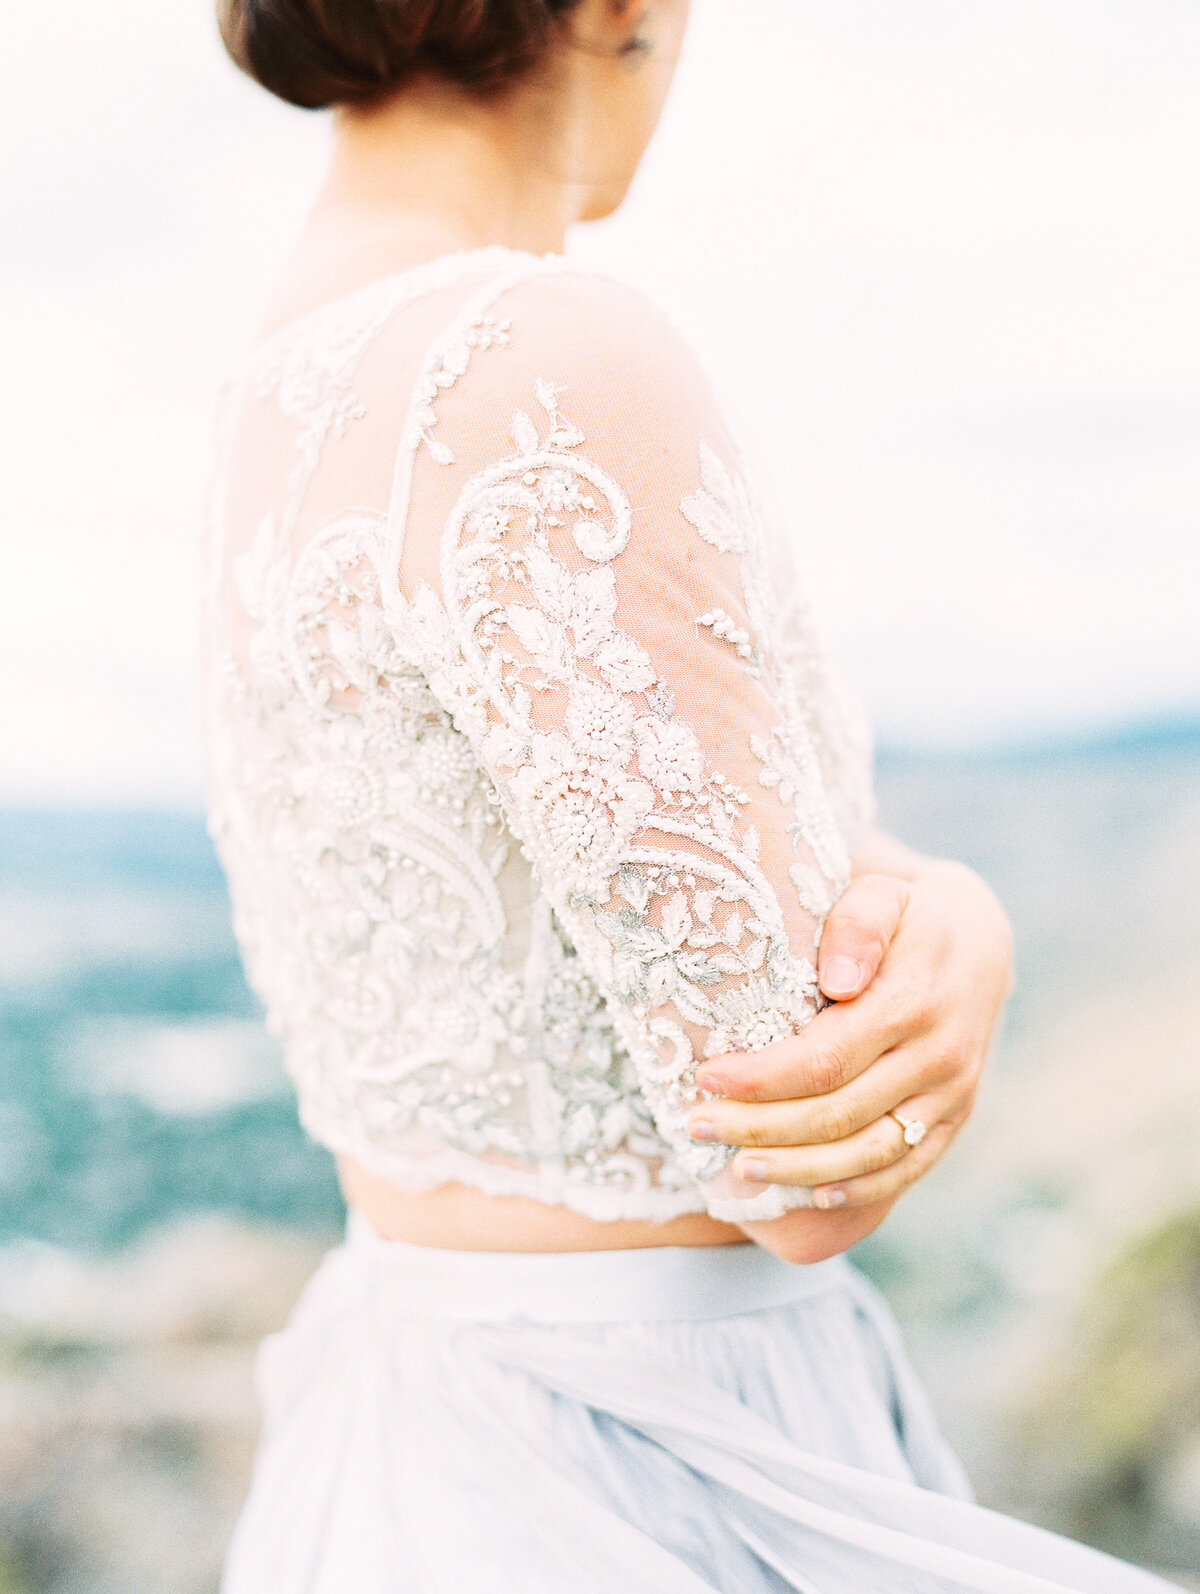 Sunrise Elopement Photos in Leanne Marshall-24